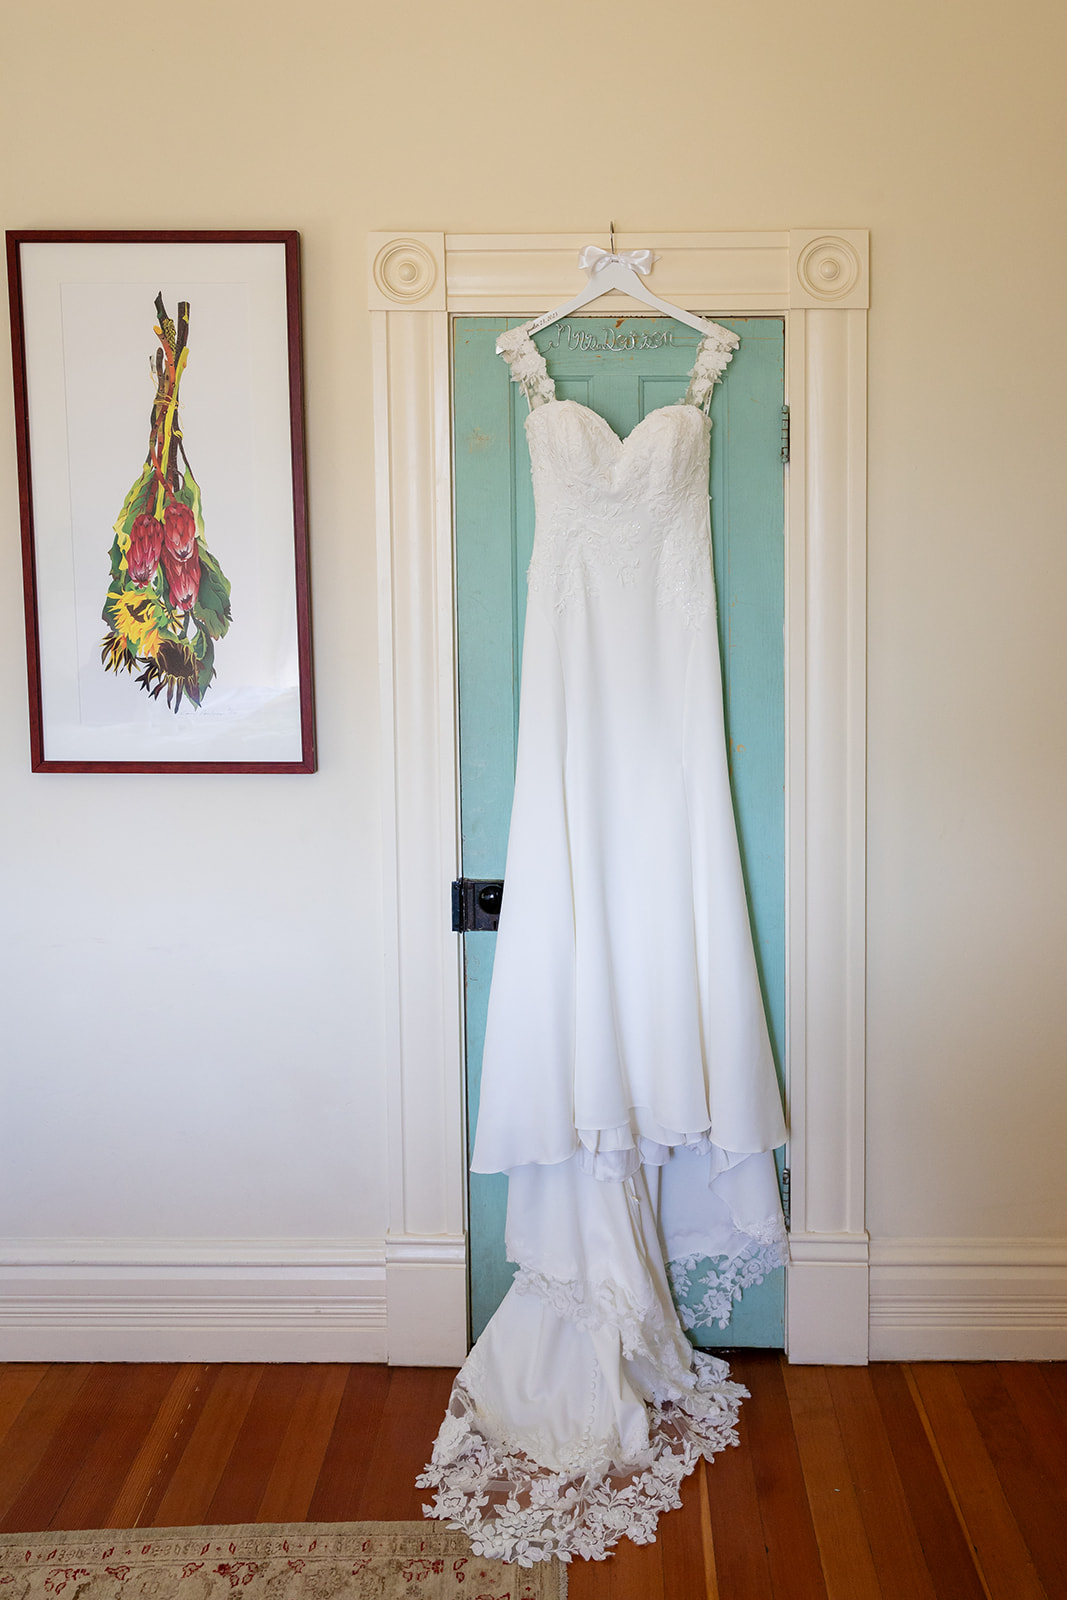 dress hanging on door at flying caballos